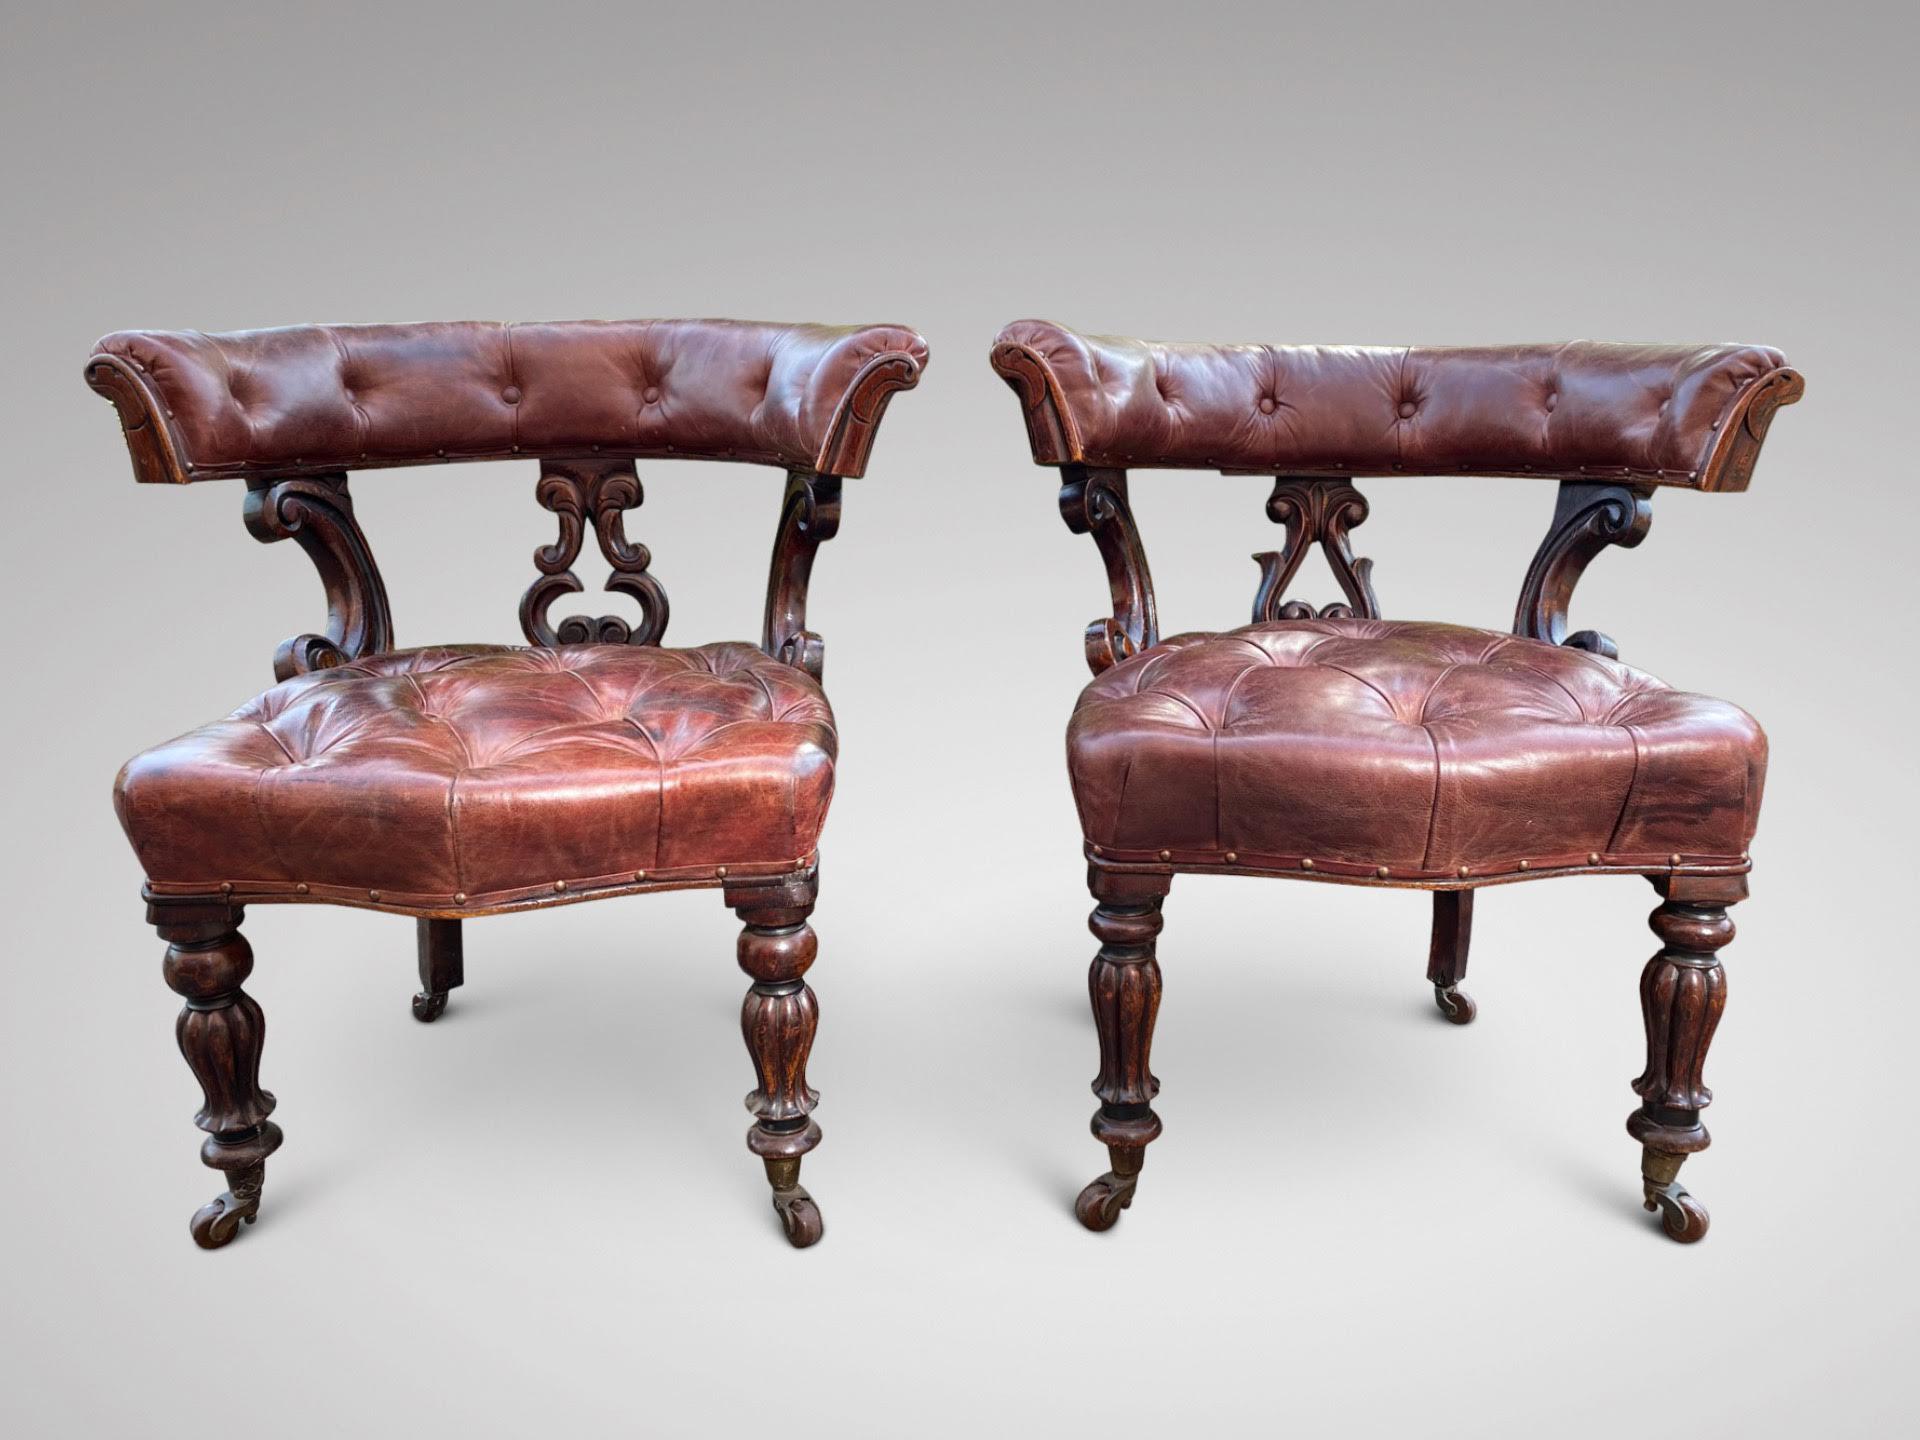 A stunning pair of William IV period leather and mahogany framed desk or library chairs with horse shoe back rest terminating in carved mahogany scroll ends. The back rest is upheld by a central splat also two angled carved mahogany supports, which